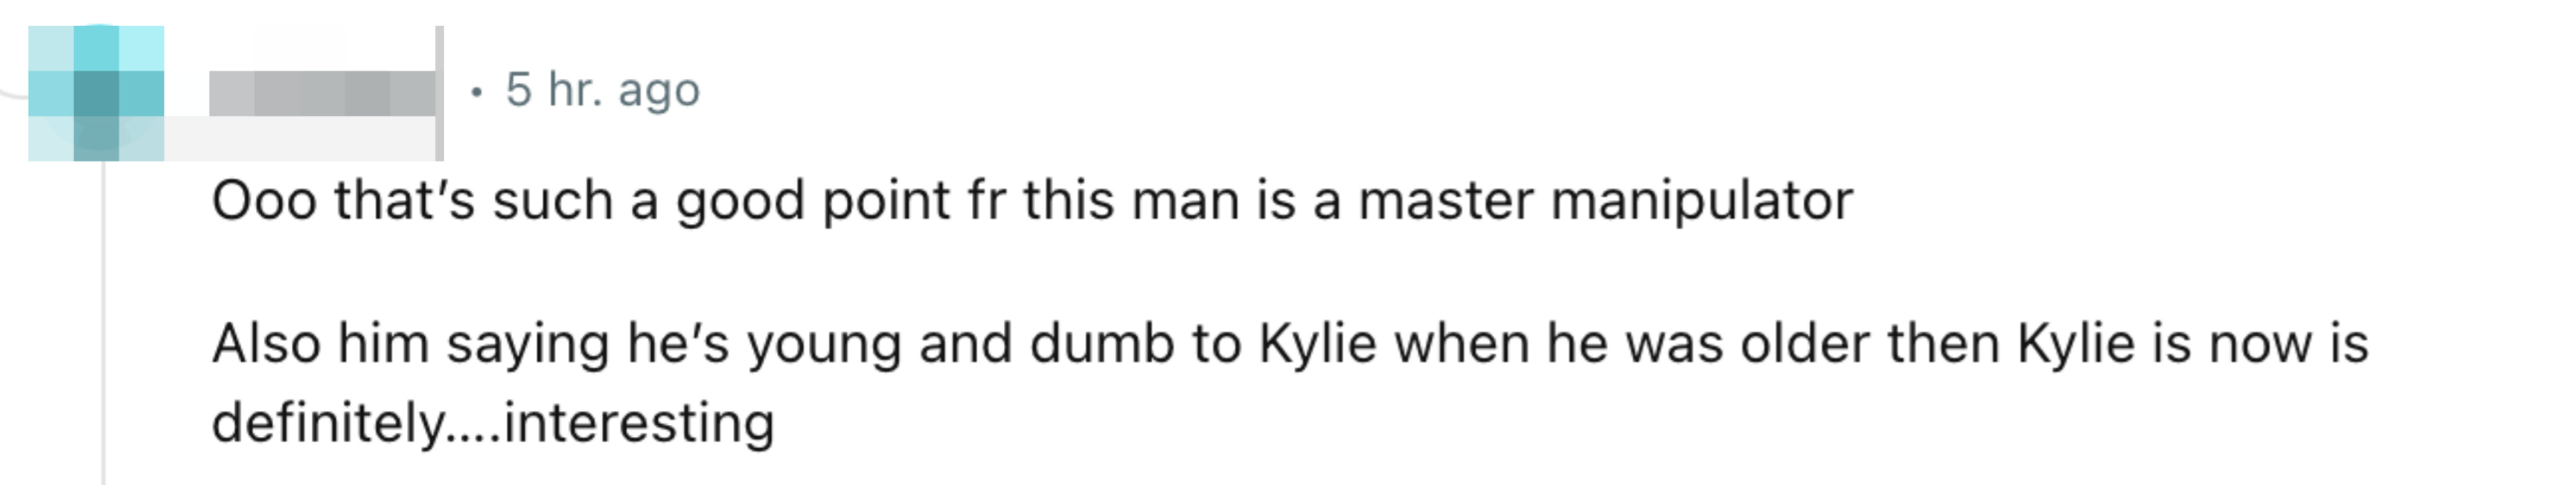 “Also him saying he’s young and dumb to Kylie when he was older then Kylie is now is definitely….interesting”